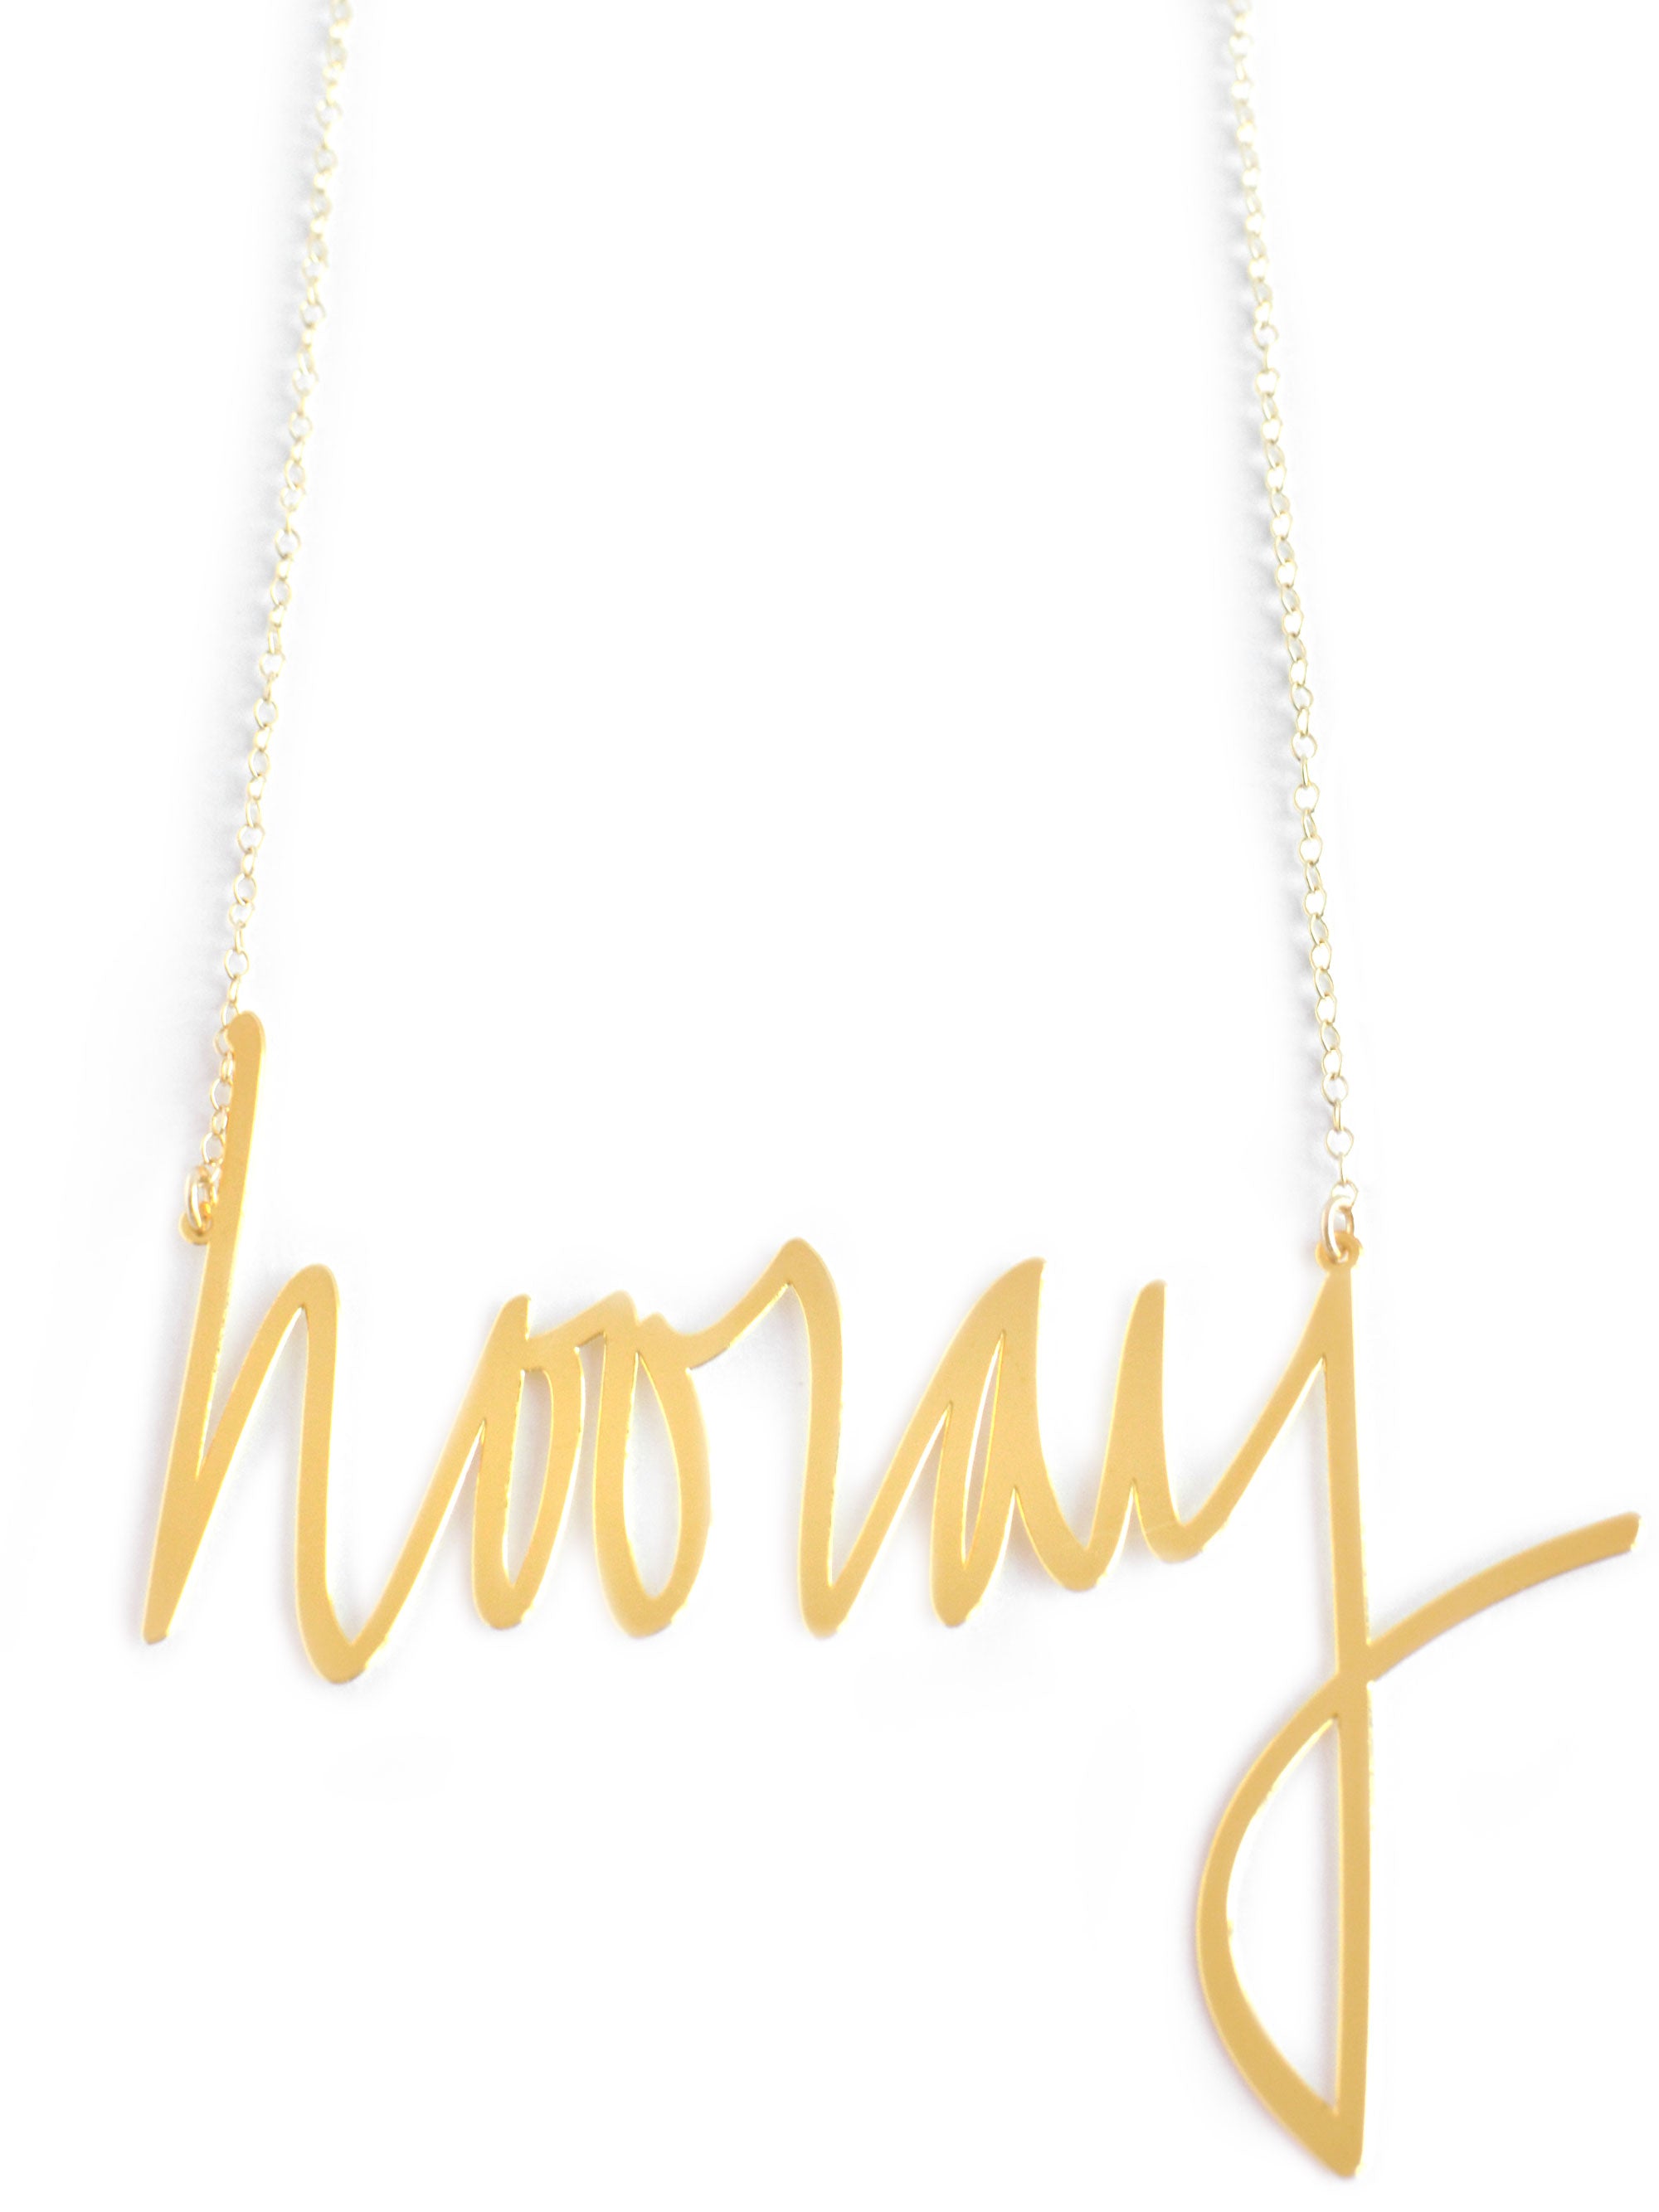 Hooray Necklace - High Quality, Affordable, Hand Written, Self Love, Mantra Word Necklace - Available in Gold and Silver - Small and Large Sizes - Made in USA - Brevity Jewelry